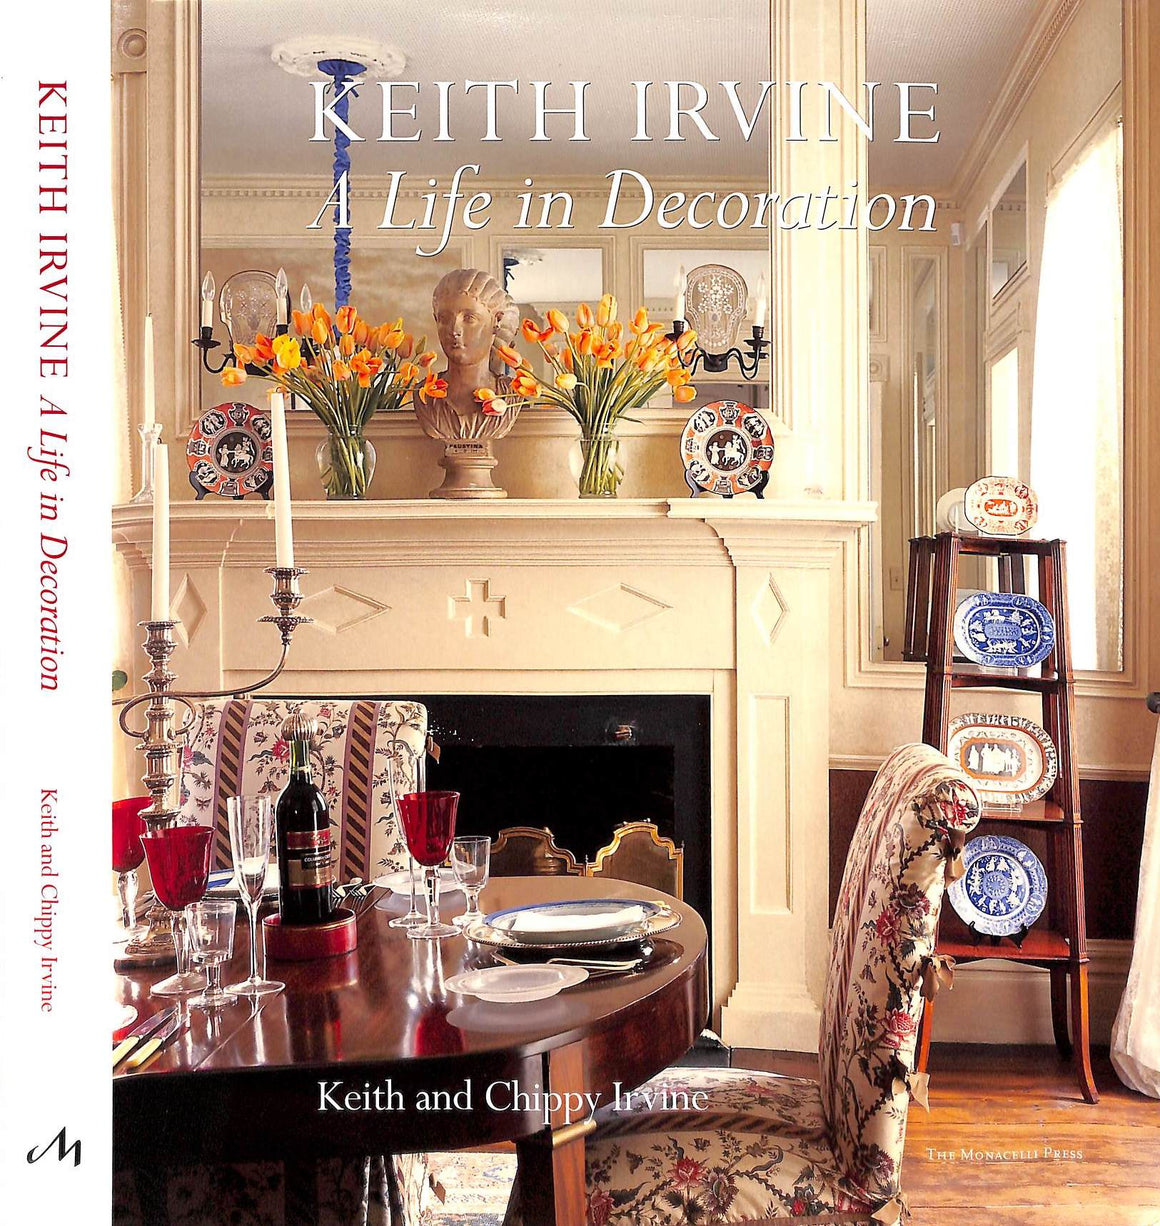 "Keith Irvine: A Life In Decoration" 2005 IRVINE, Keith and Chippy